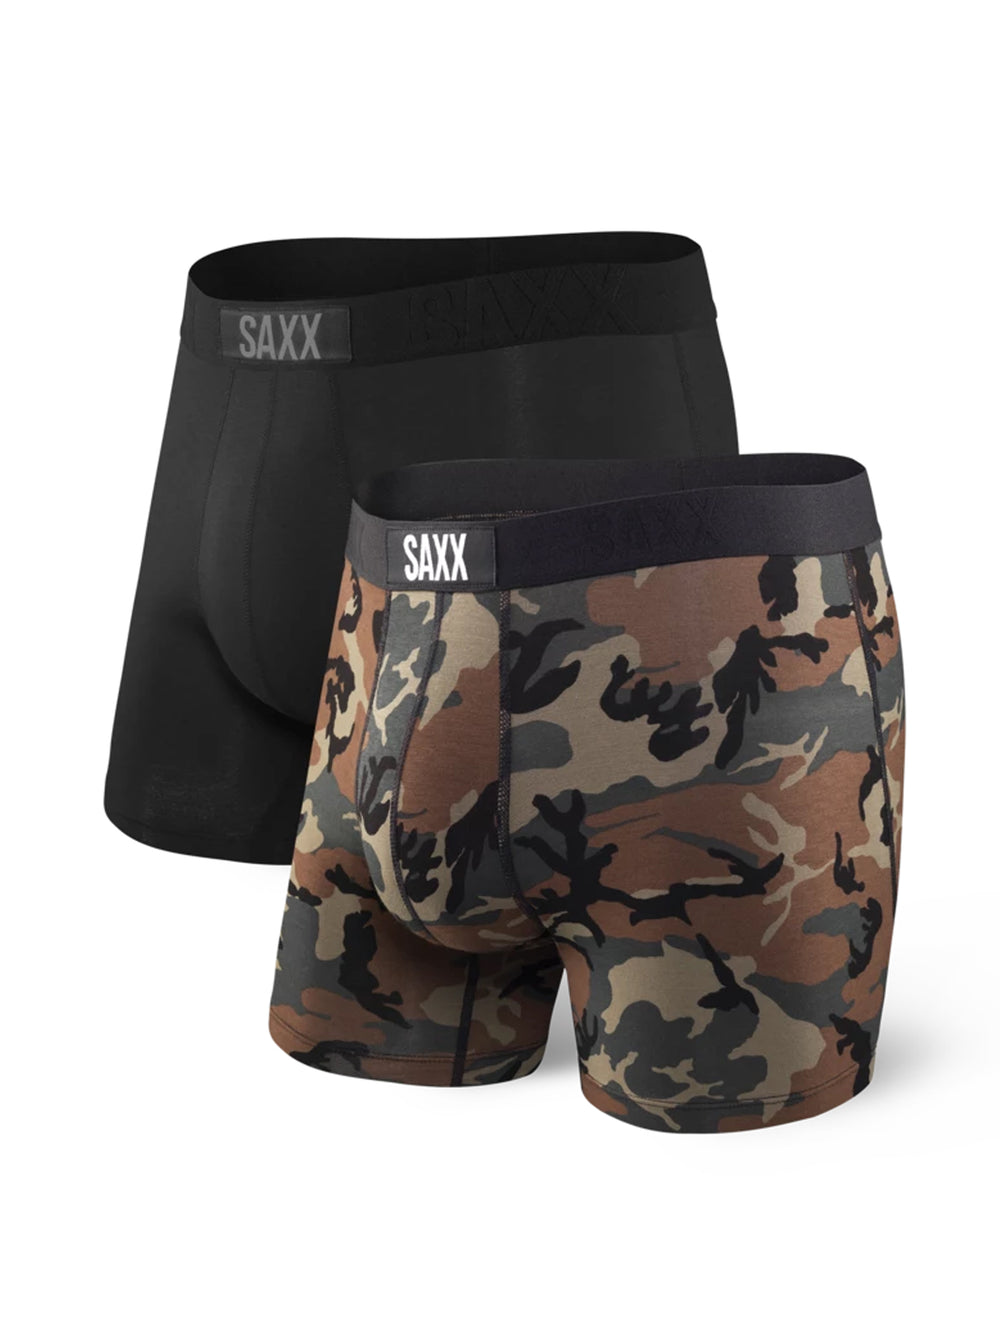 SAXX VIBE BOXER BRIEF 2 PACK